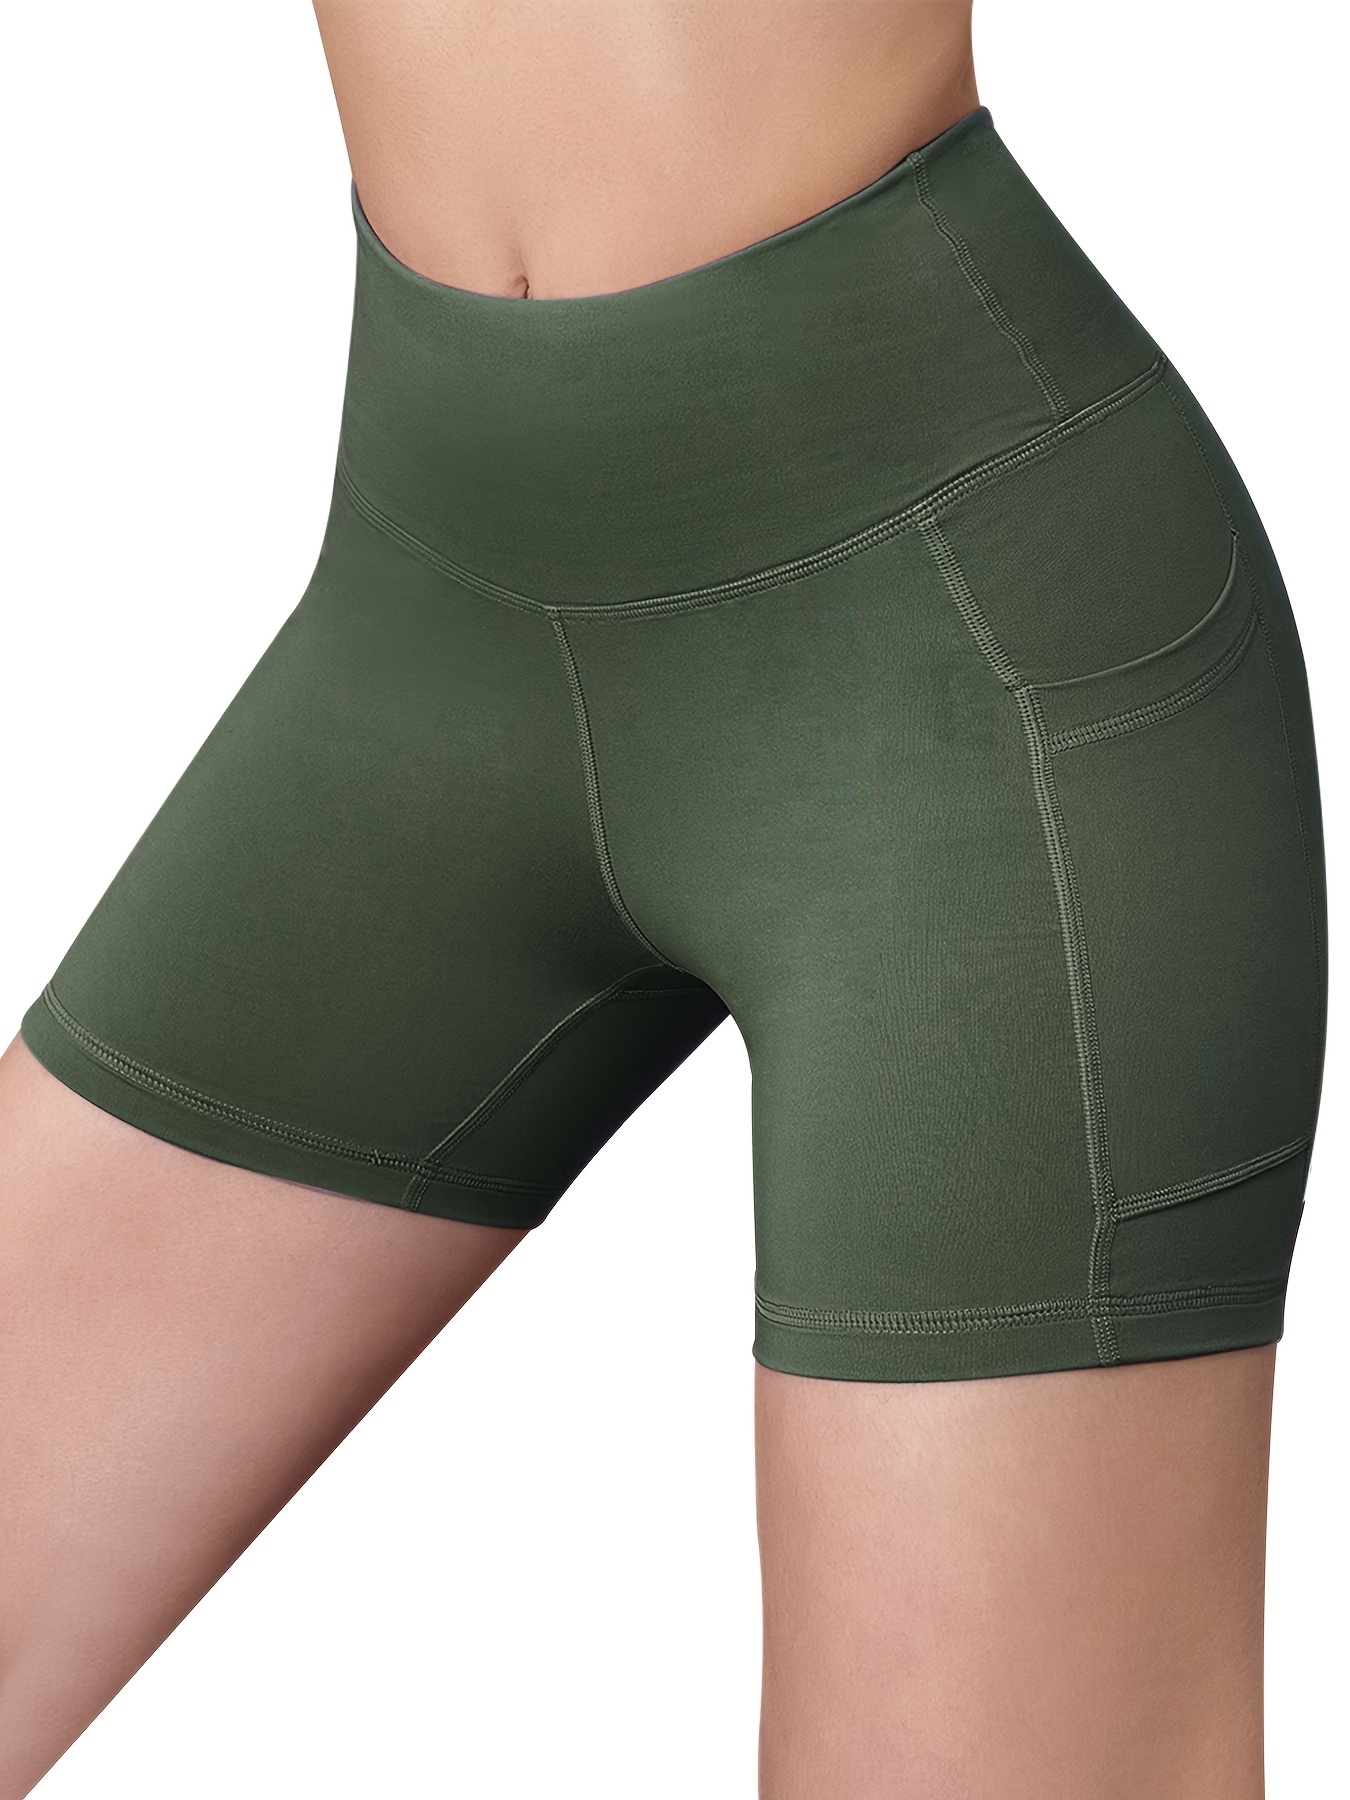 Women's Running Shorts High Waisted Athletic Shorts Exercise Gym Workout  Shorts for Women with Pockets - Army Green 